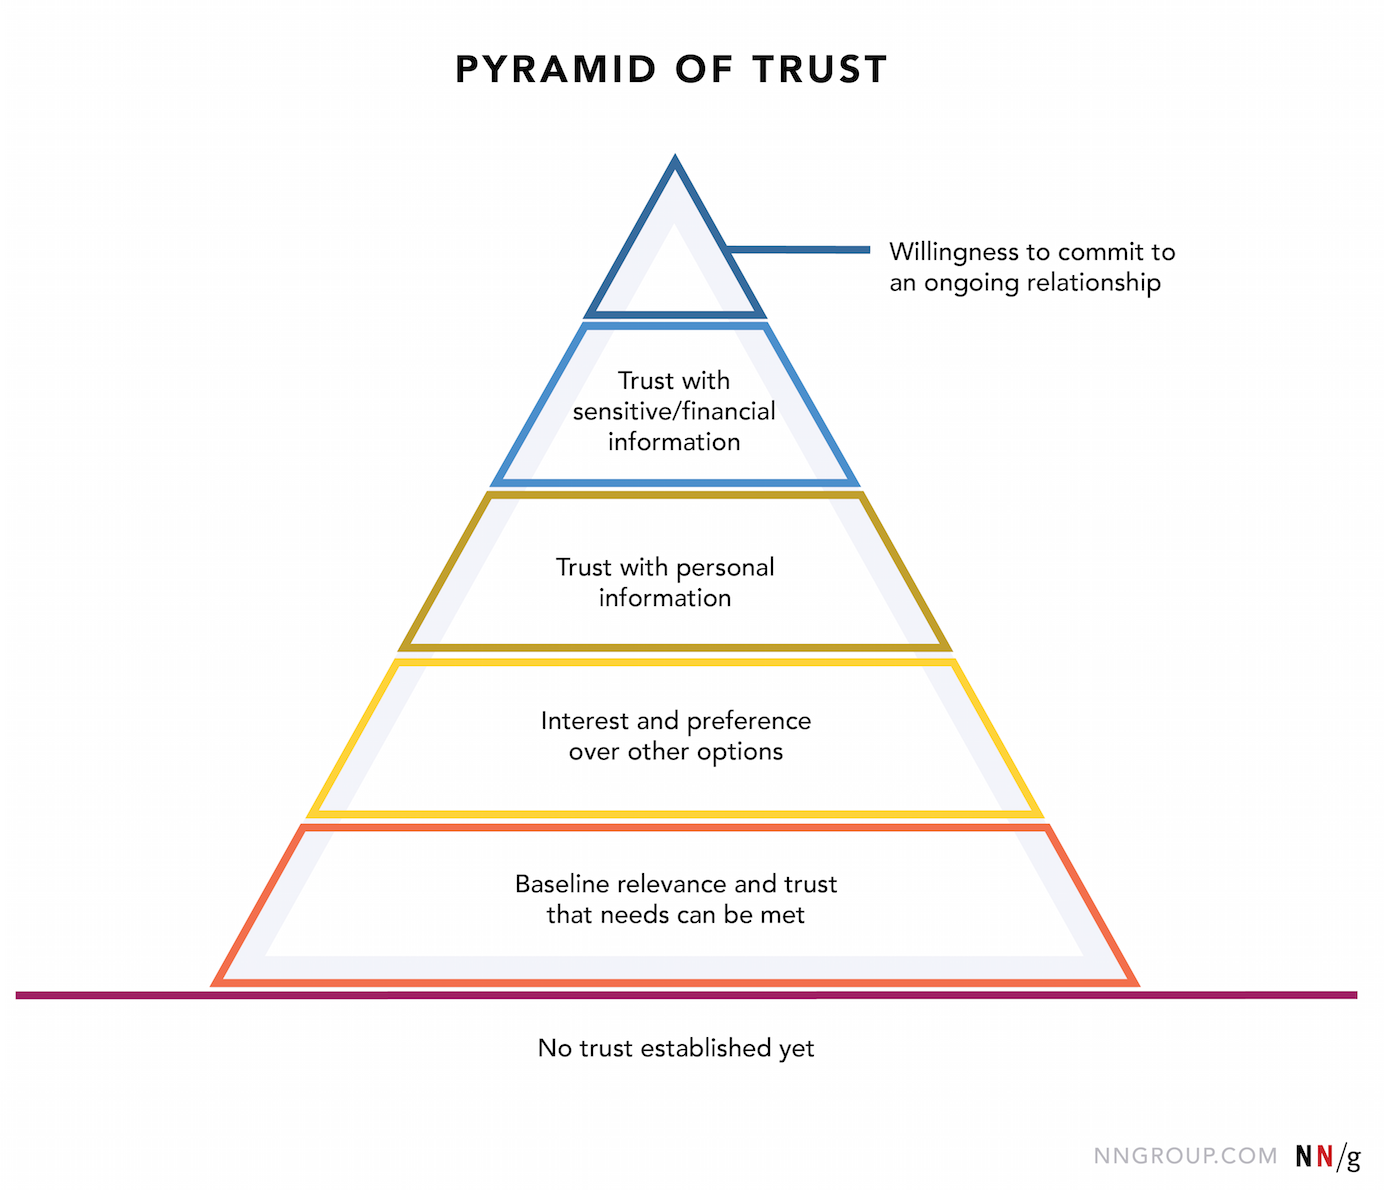 Five experiential levels of commitment shown on the pyramid of trust